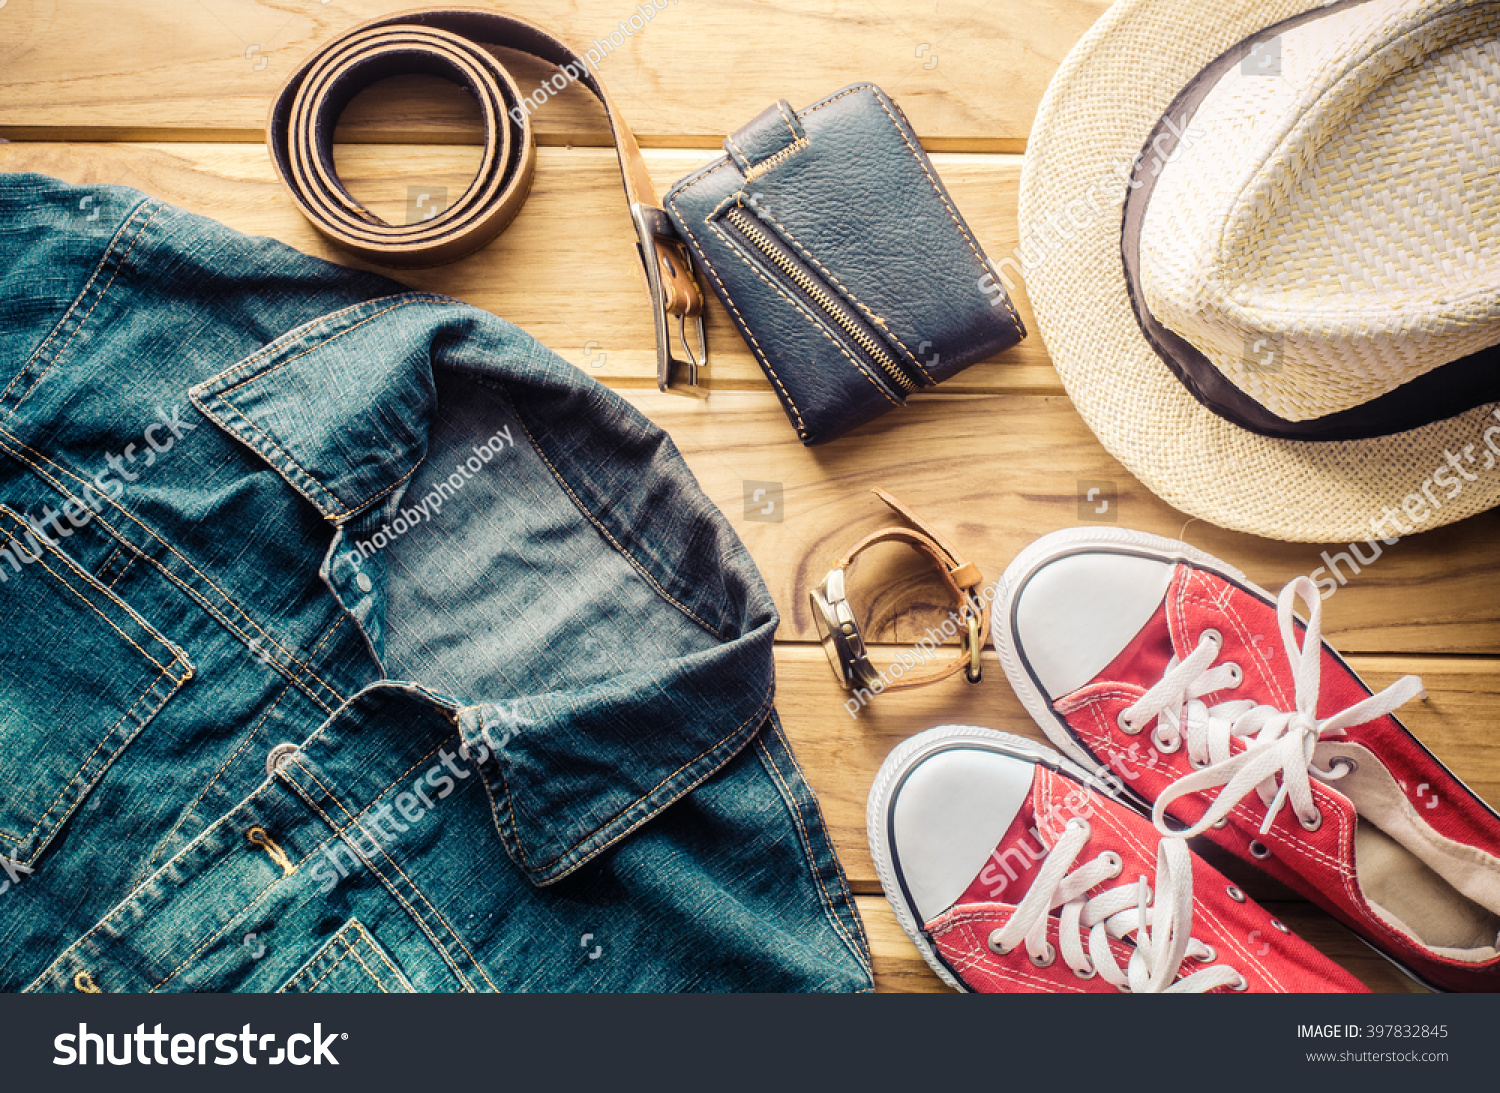 Travel Clothing Accessories Apparel Along For The Trip Stock Photo ...